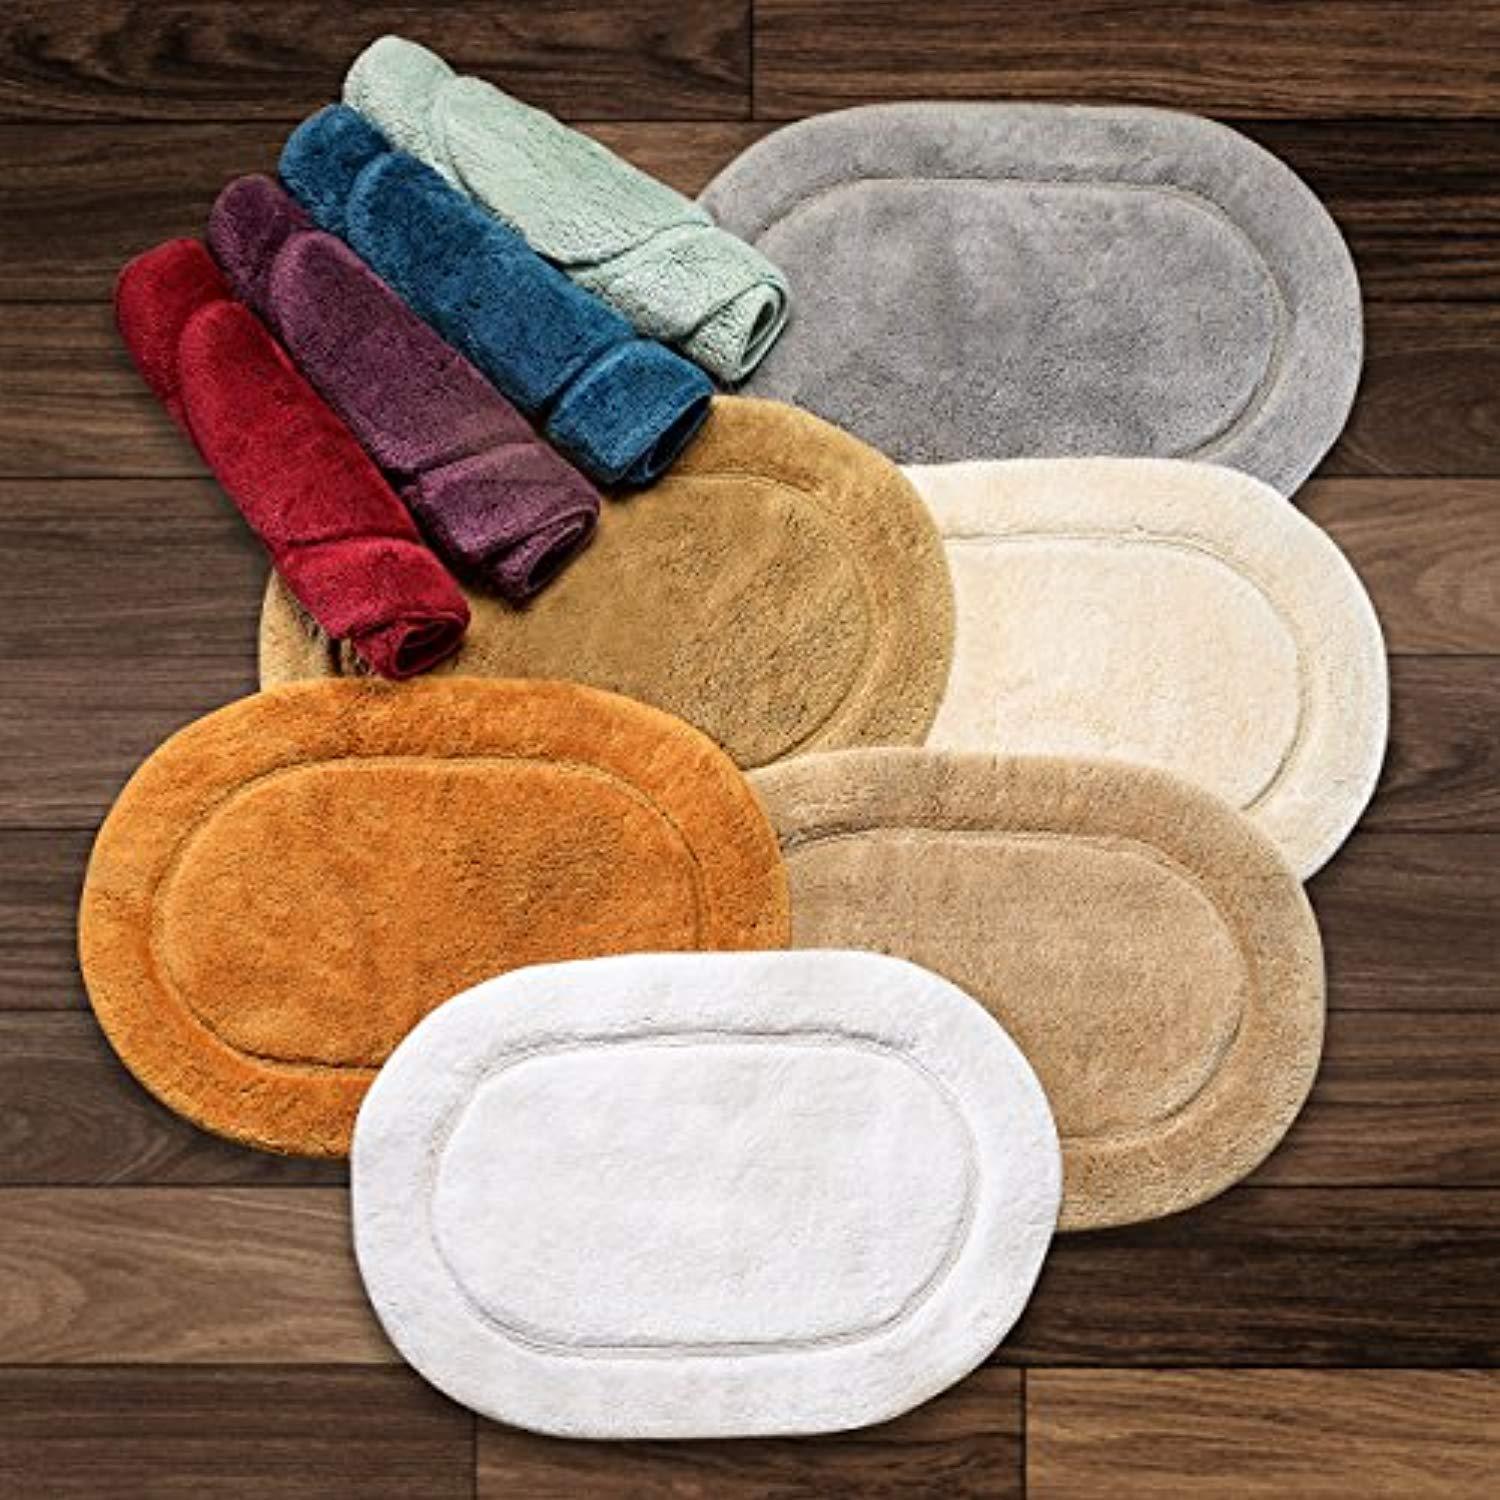 https://downcotton.com/cdn/shop/products/ultra-plush-soft-and-absorbent-100-combed-cotton-pile-bath-rugs-oval-checkered-styles-bath-rug-down-cotton-371618_1800x1800.jpg?v=1601575711